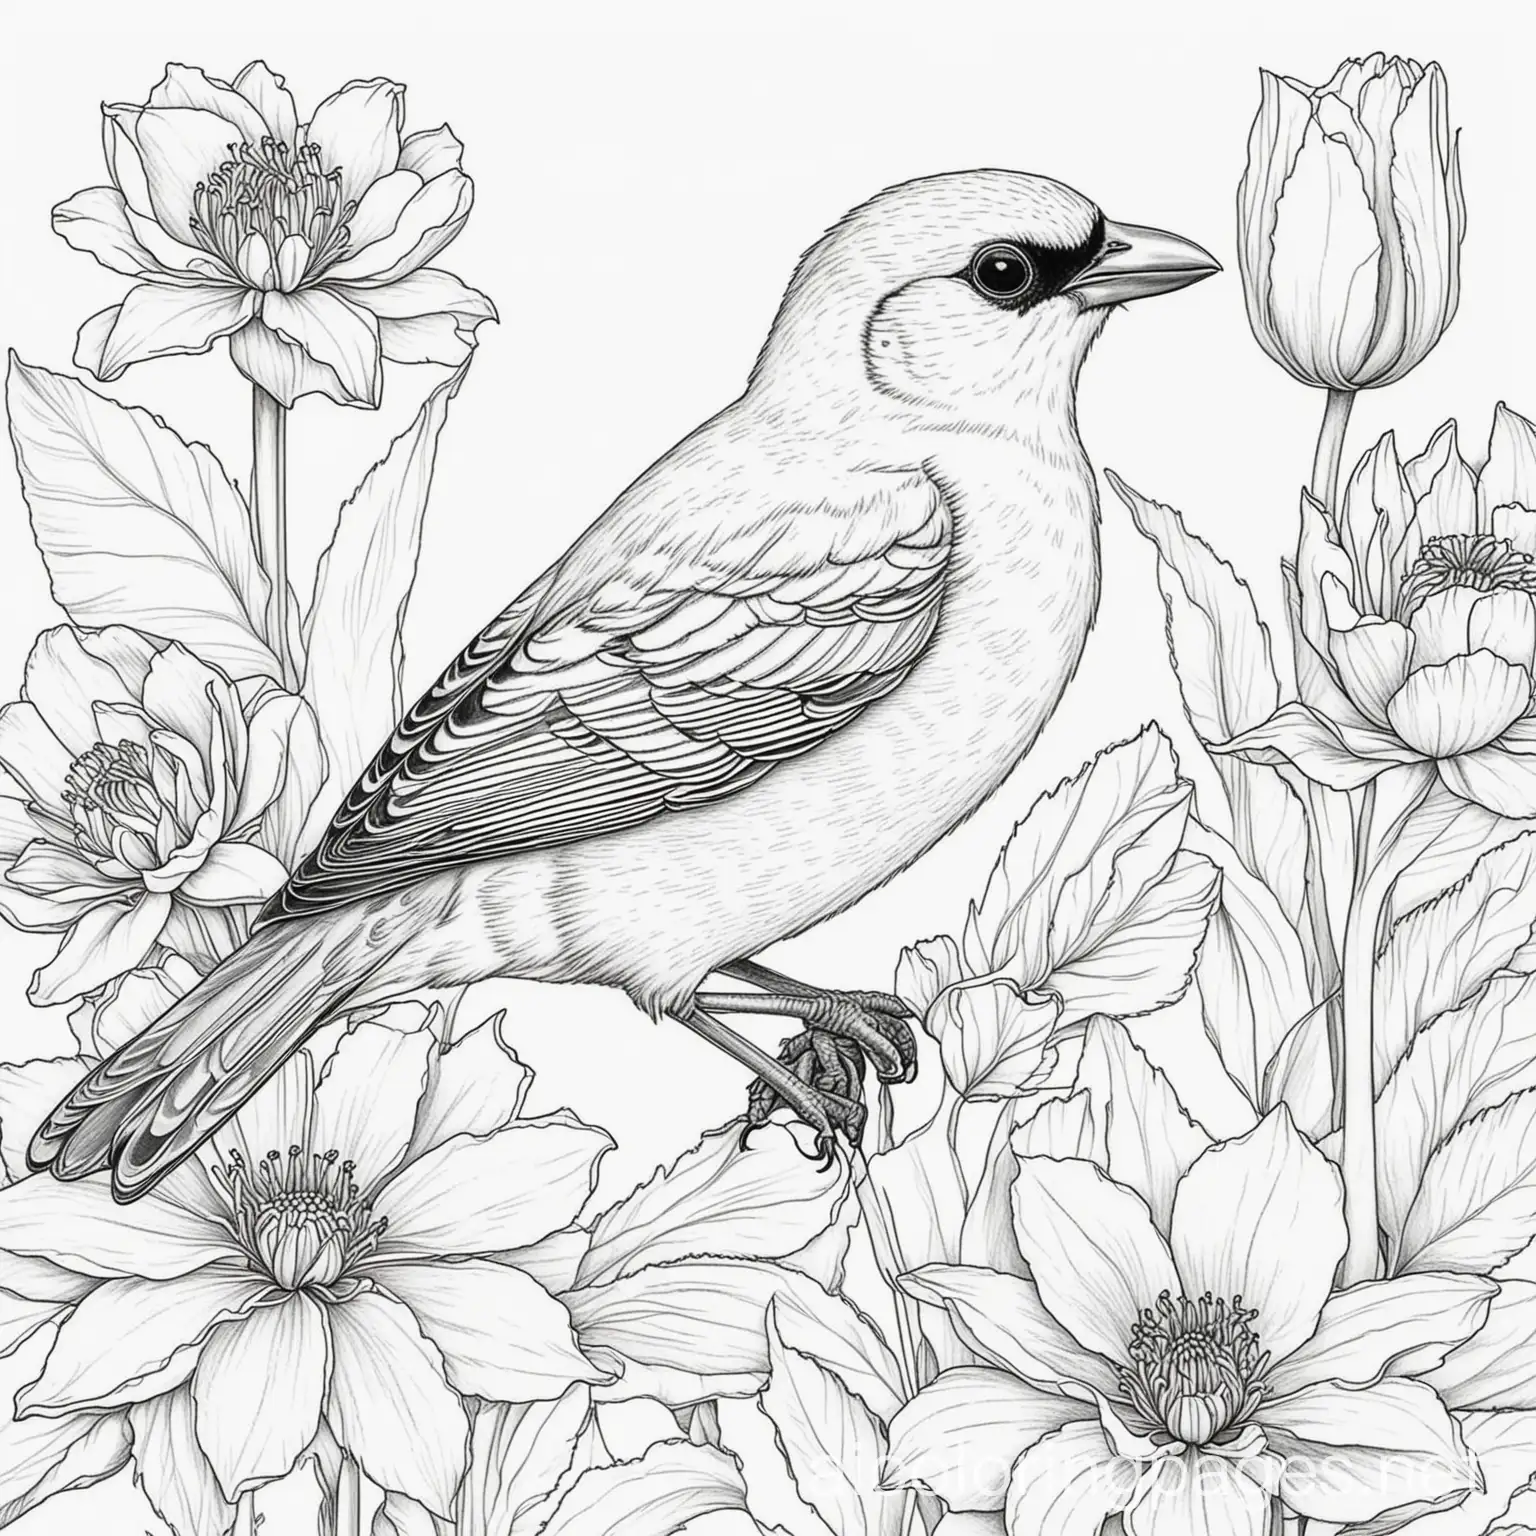 Paradise Tanager with tulips and dahlia flowers, Coloring Page, black and white, line art, white background, Simplicity, Ample White Space. The background of the coloring page is plain white to make it easy for young children to color within the lines. The outlines of all the subjects are easy to distinguish, making it simple for kids to color without too much difficulty